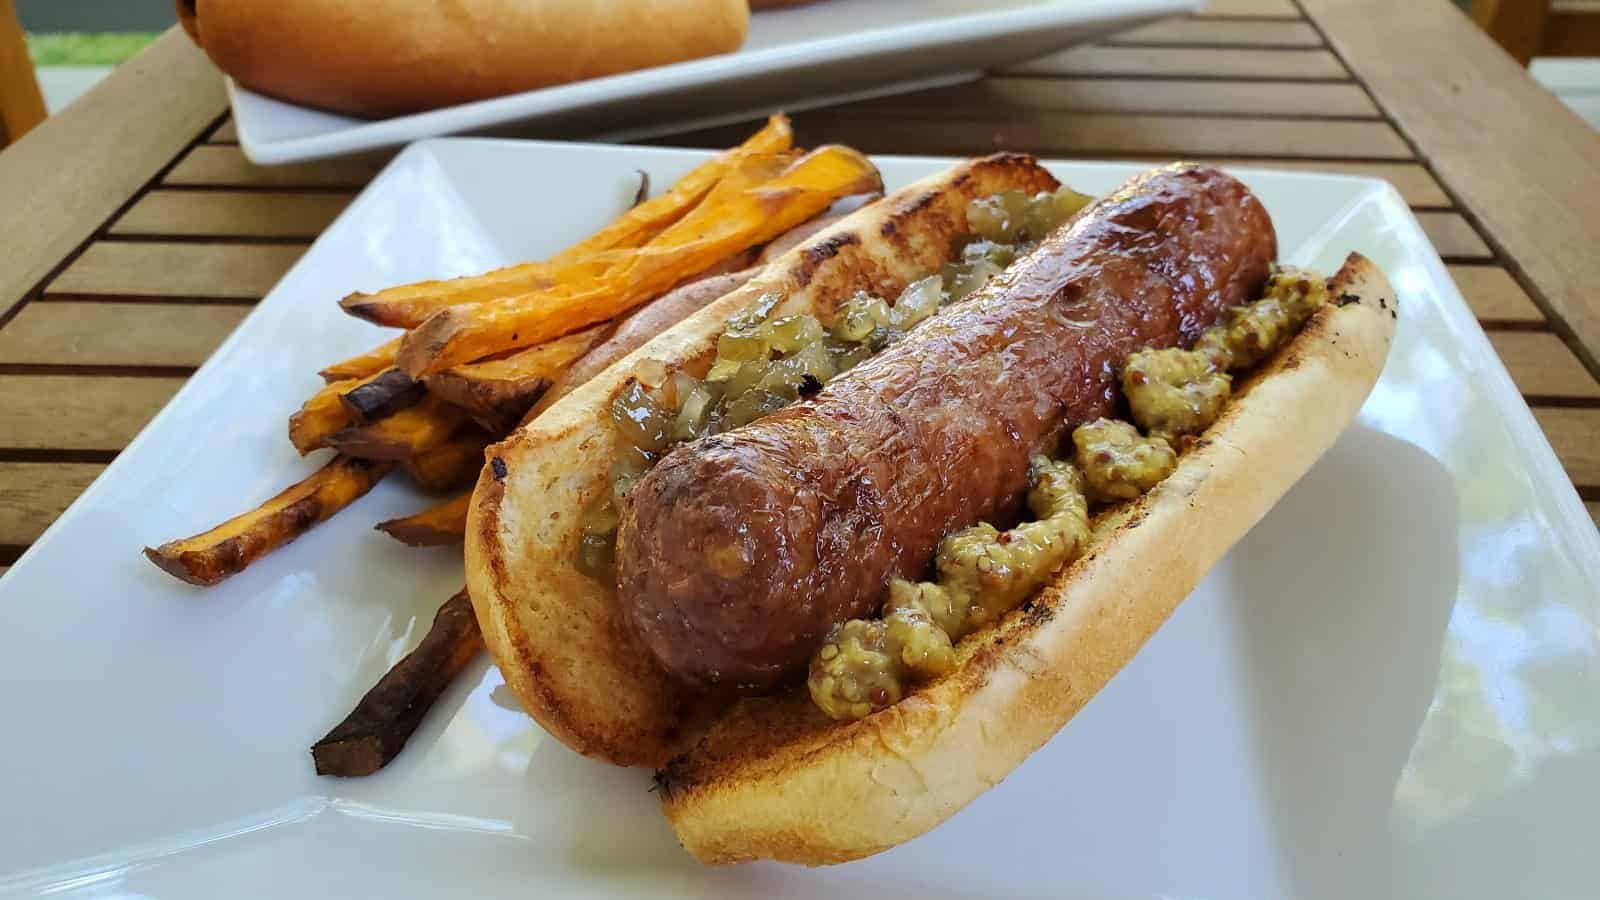 Image shows a beer boiled brat on a bun with sweet potato fries on a plate and more brats in the background.